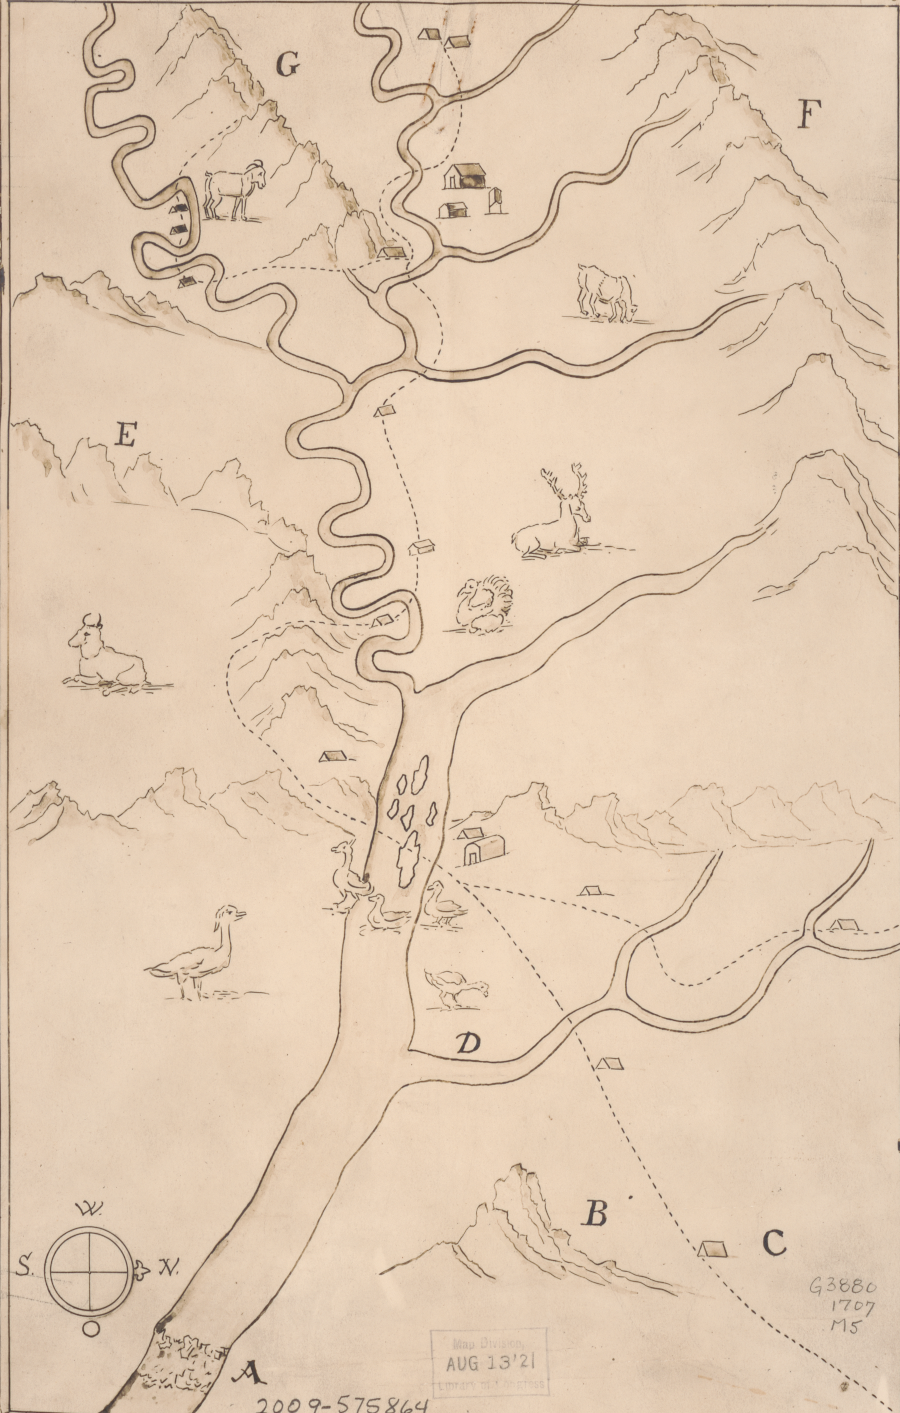 Franz Ludwig Michel was the first European to map the pattern of rivers and mountains in the Shenandoah Valley